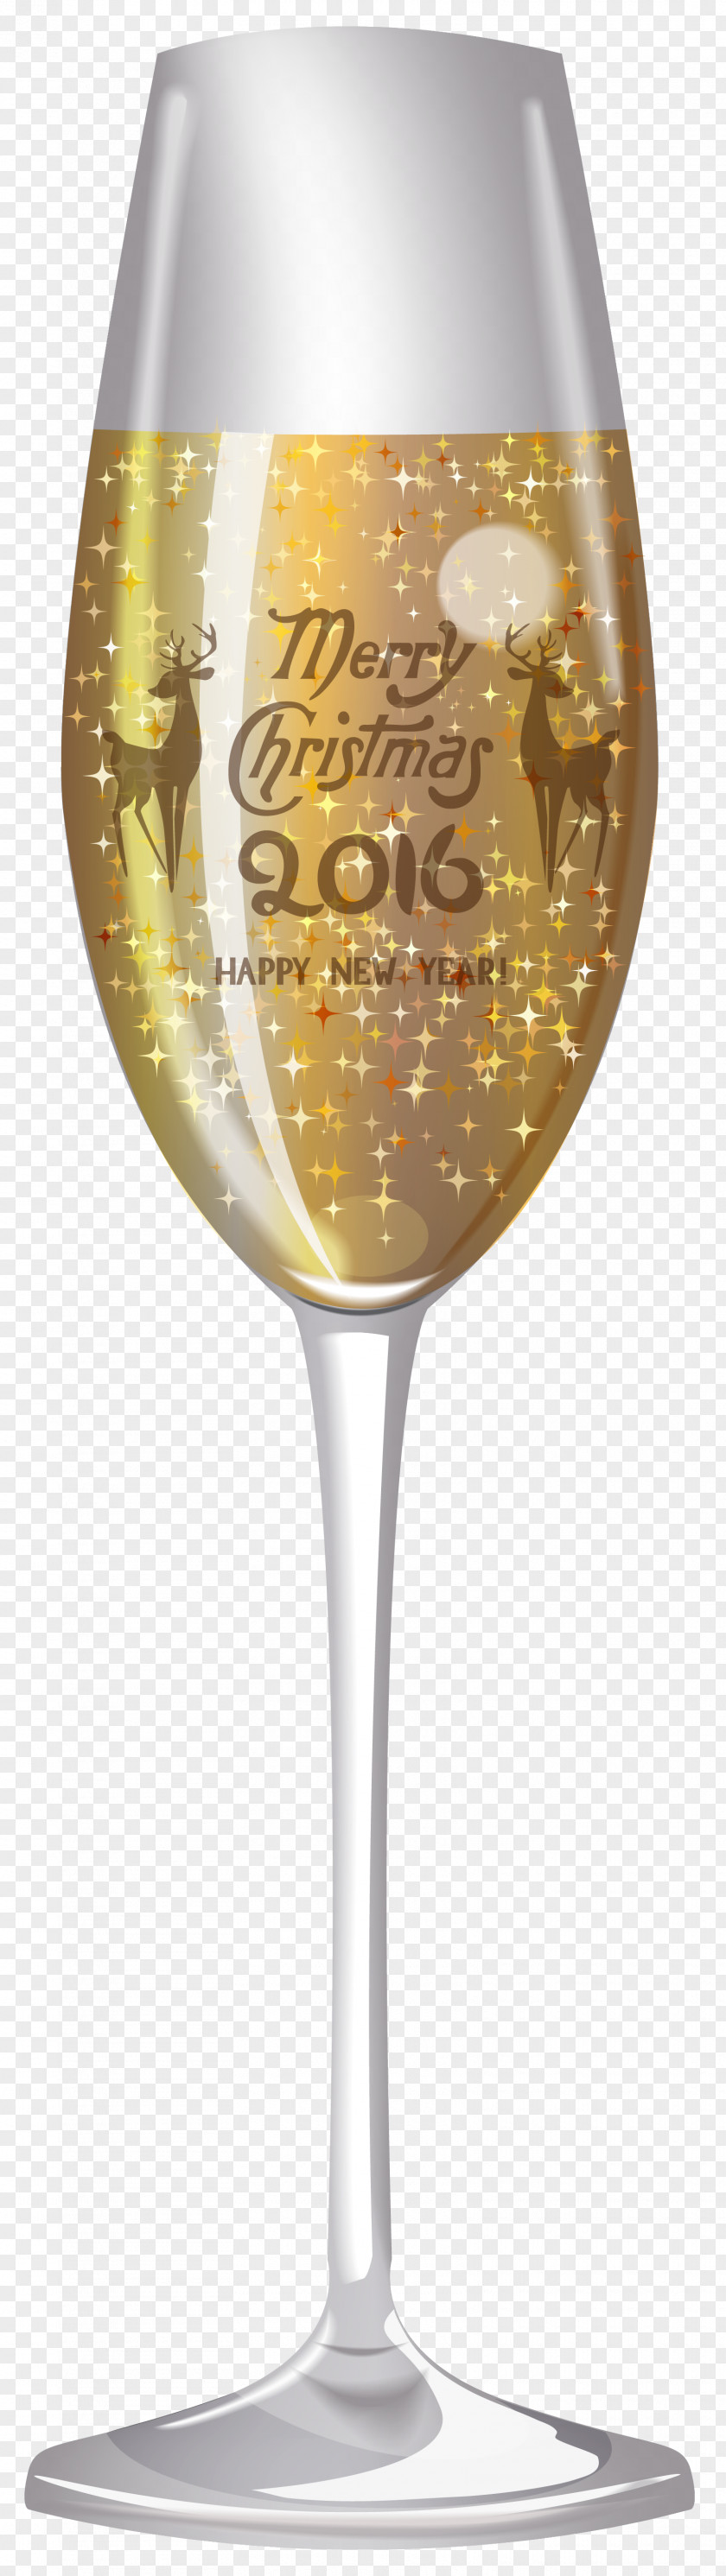 2016 Champagne Glass Clipart Image White Wine PNG